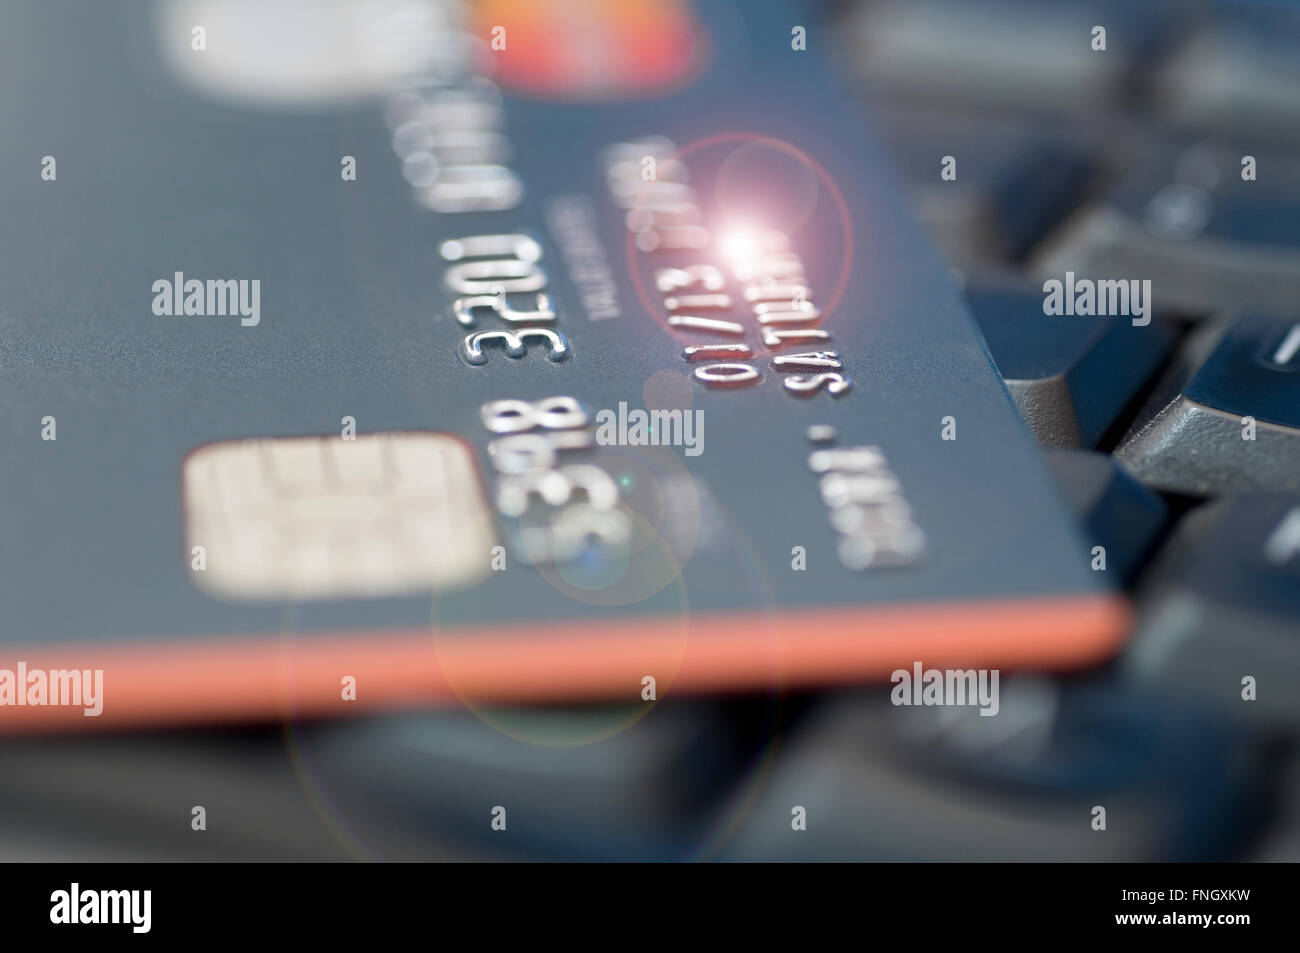 Credit card with flare effects laying on laptop's keyboard Stock Photo